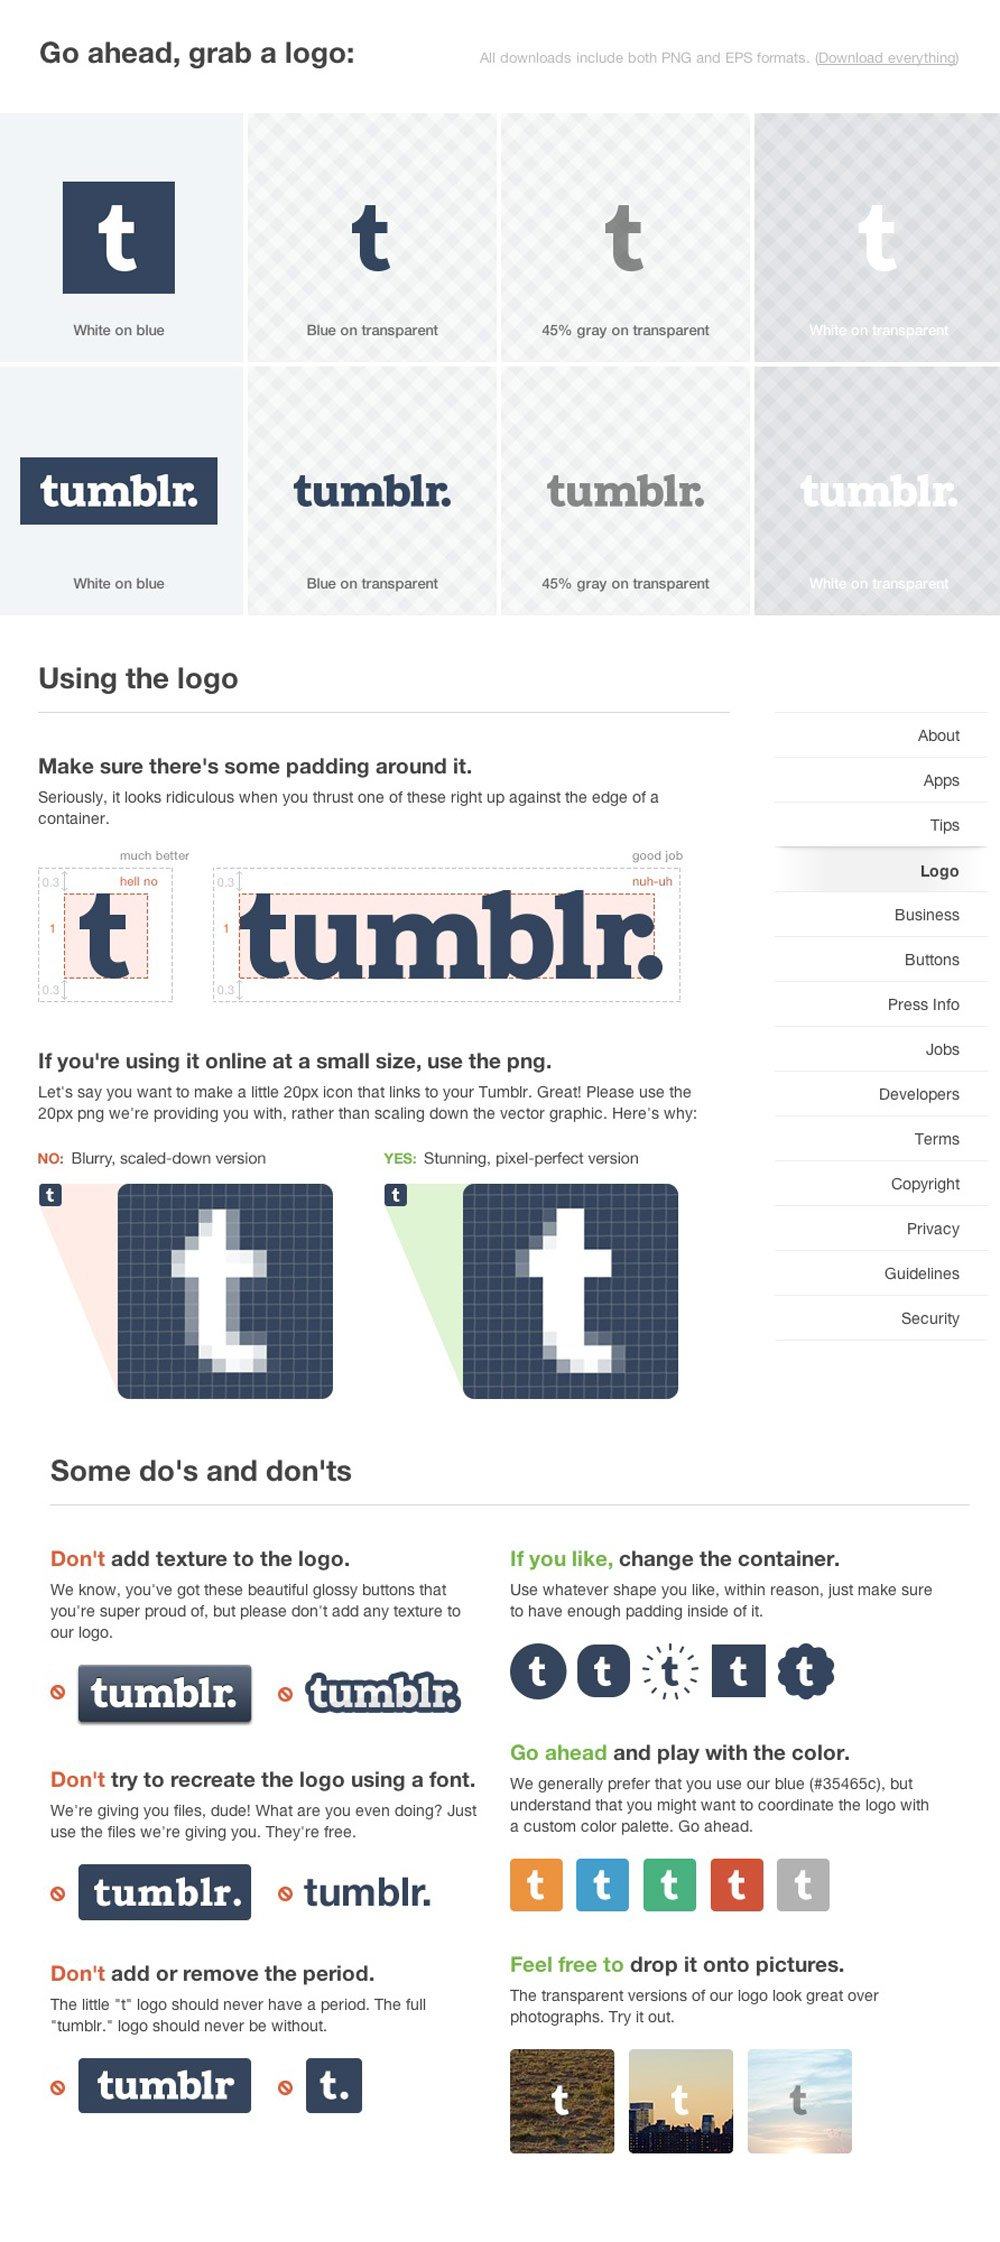 Tumblr T Logo - Tumblr Gets a New Logo - See What's Different Between the Old and New